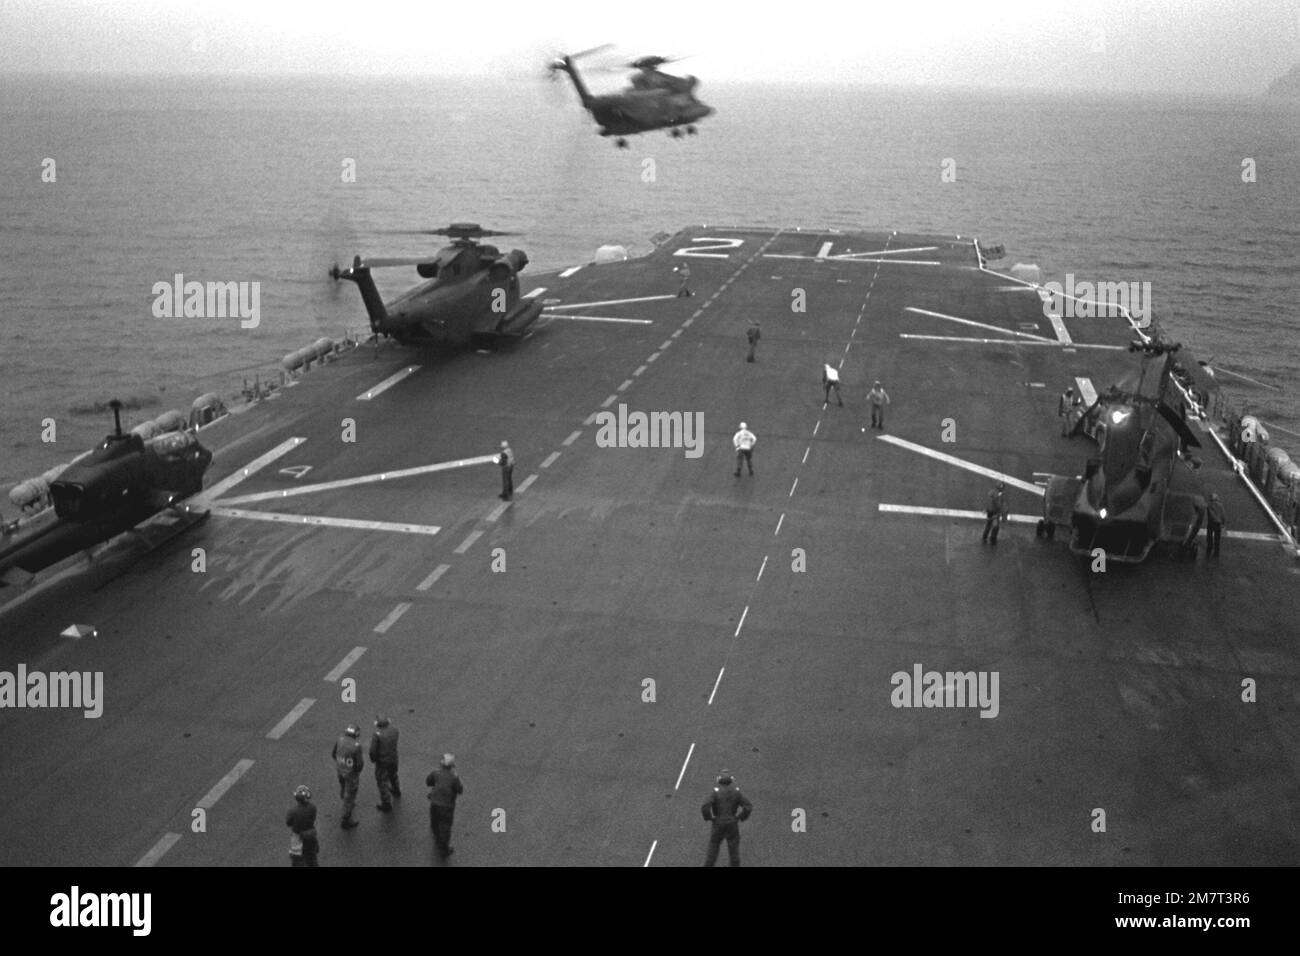 An H-53 Sea Stallion helicopter lifts off the flight deck of the amphibious assault ship USS SAIPAN (LHA-2) during the NATO exercise Display Determination '81. The other helicopters are from left to right: an AH-1 Sea Cobra, an H-53 Sea Stallion and an H-46 Sea Knight. Subject Operation/Series: DISPLAY DETERMINATION '81 Country: Mediterranean Sea (MED) Stock Photo